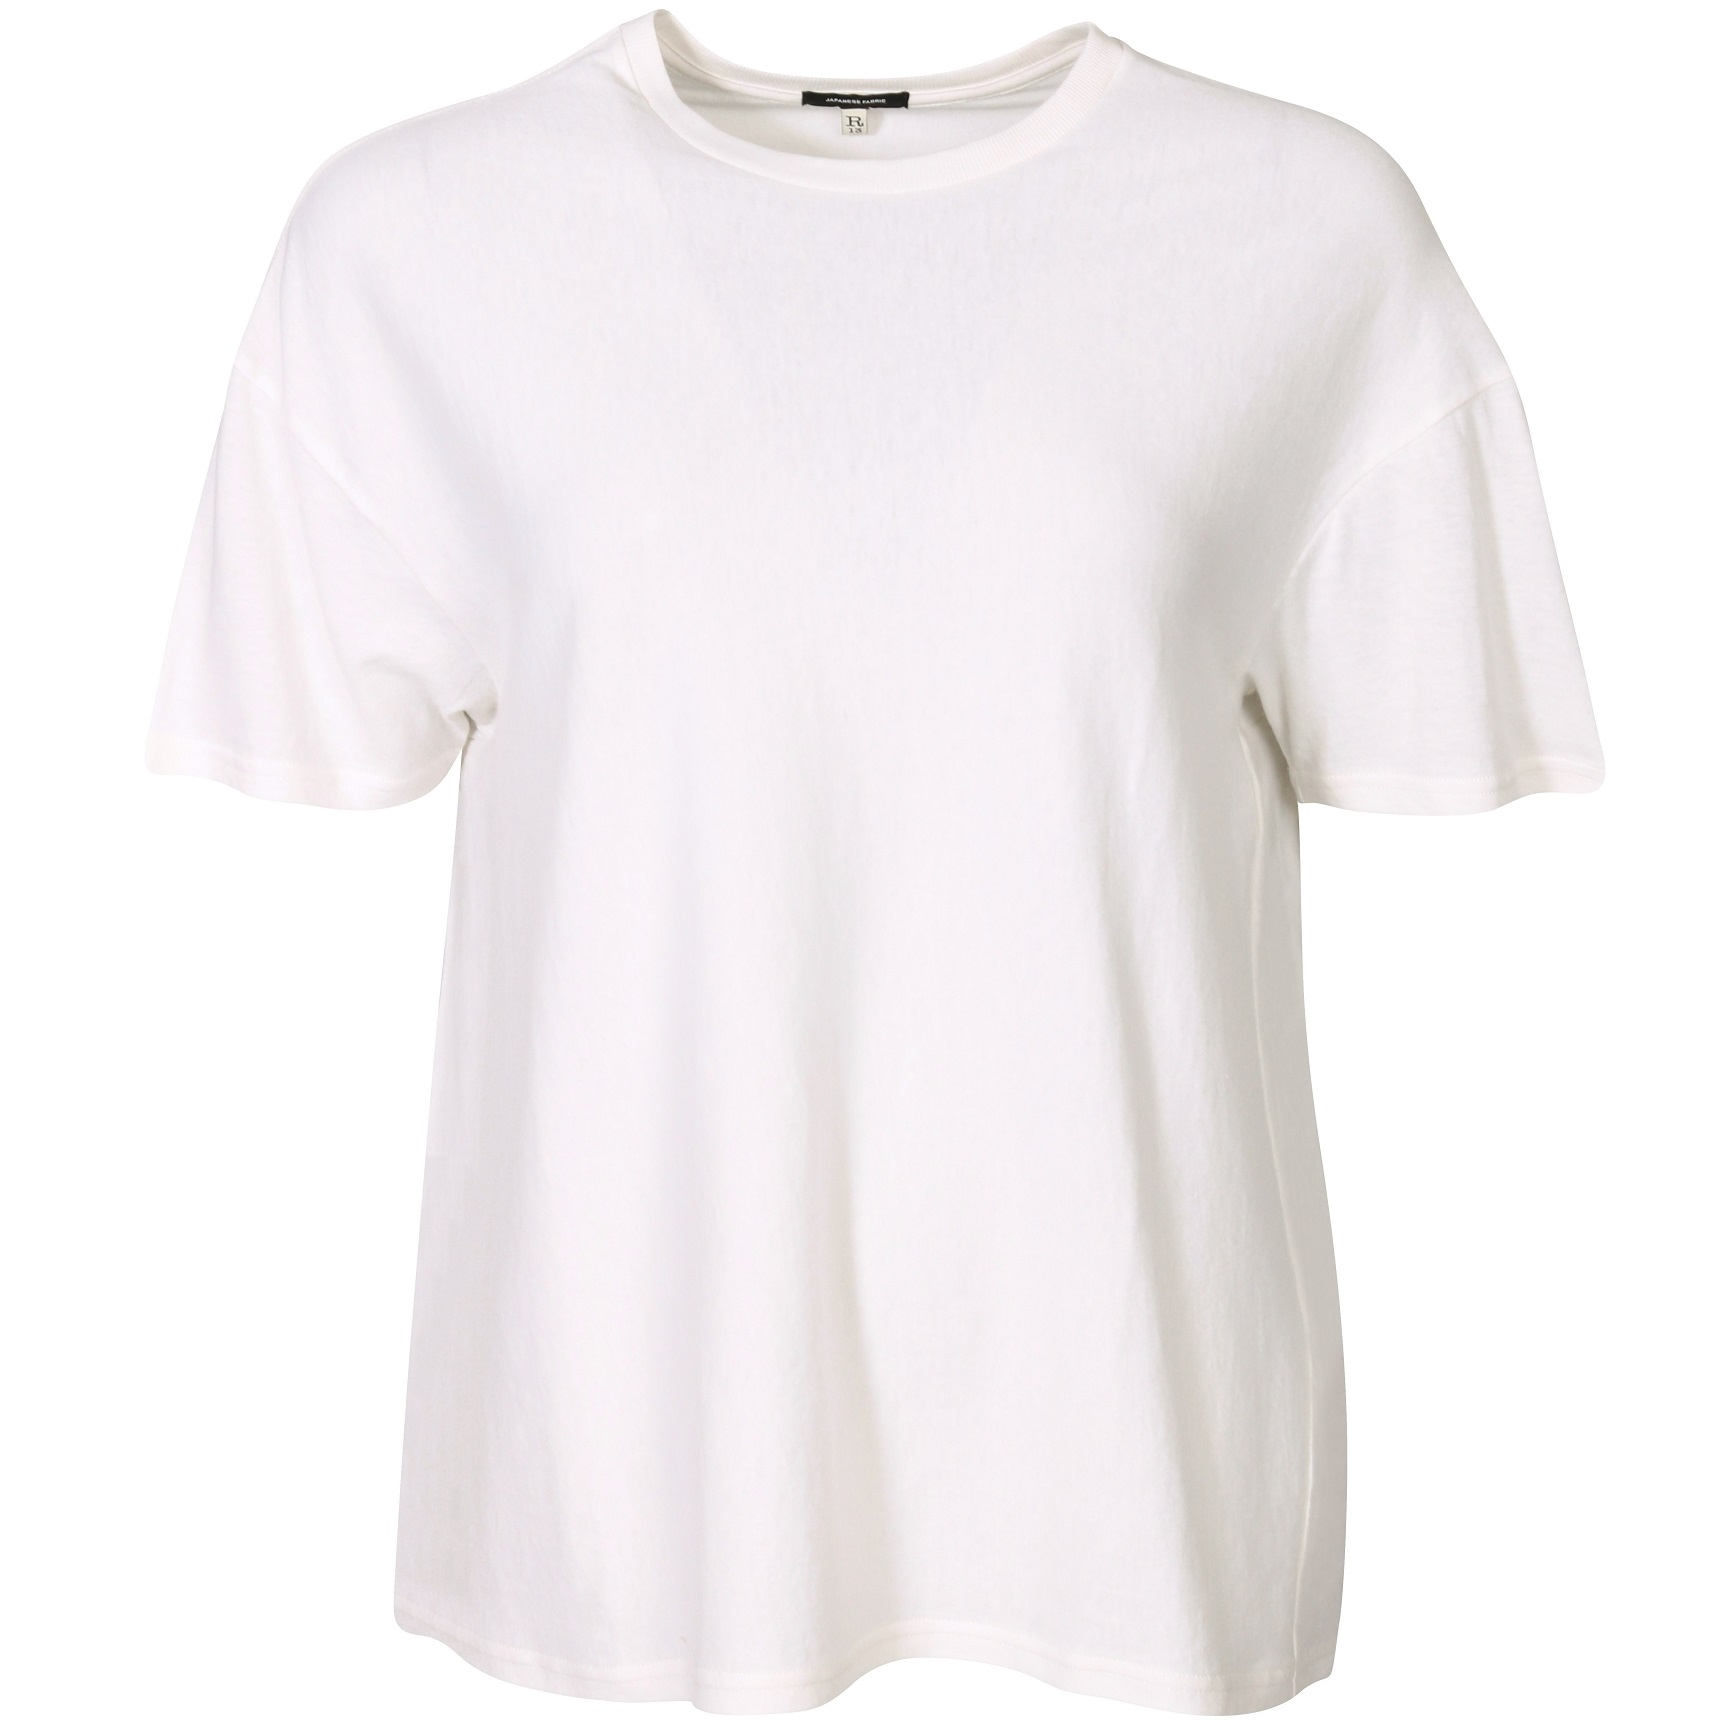 R13 Boxy Seamless T-Shirt in White